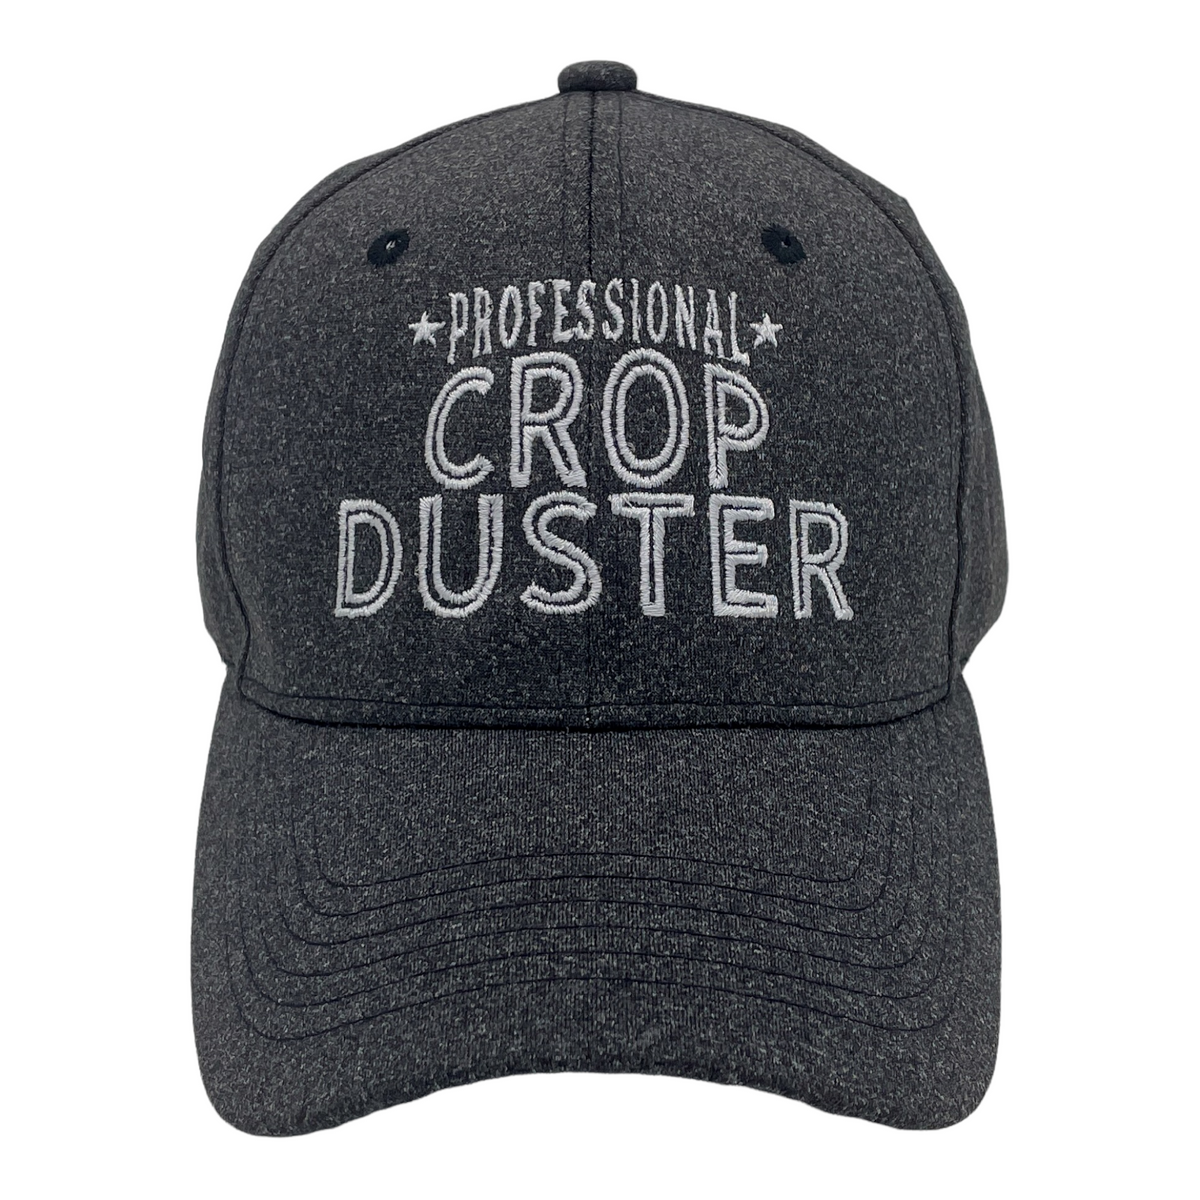 Funny Black - Professional Crop Duster Professional Crop Duster Nerdy Sarcastic Toilet Tee